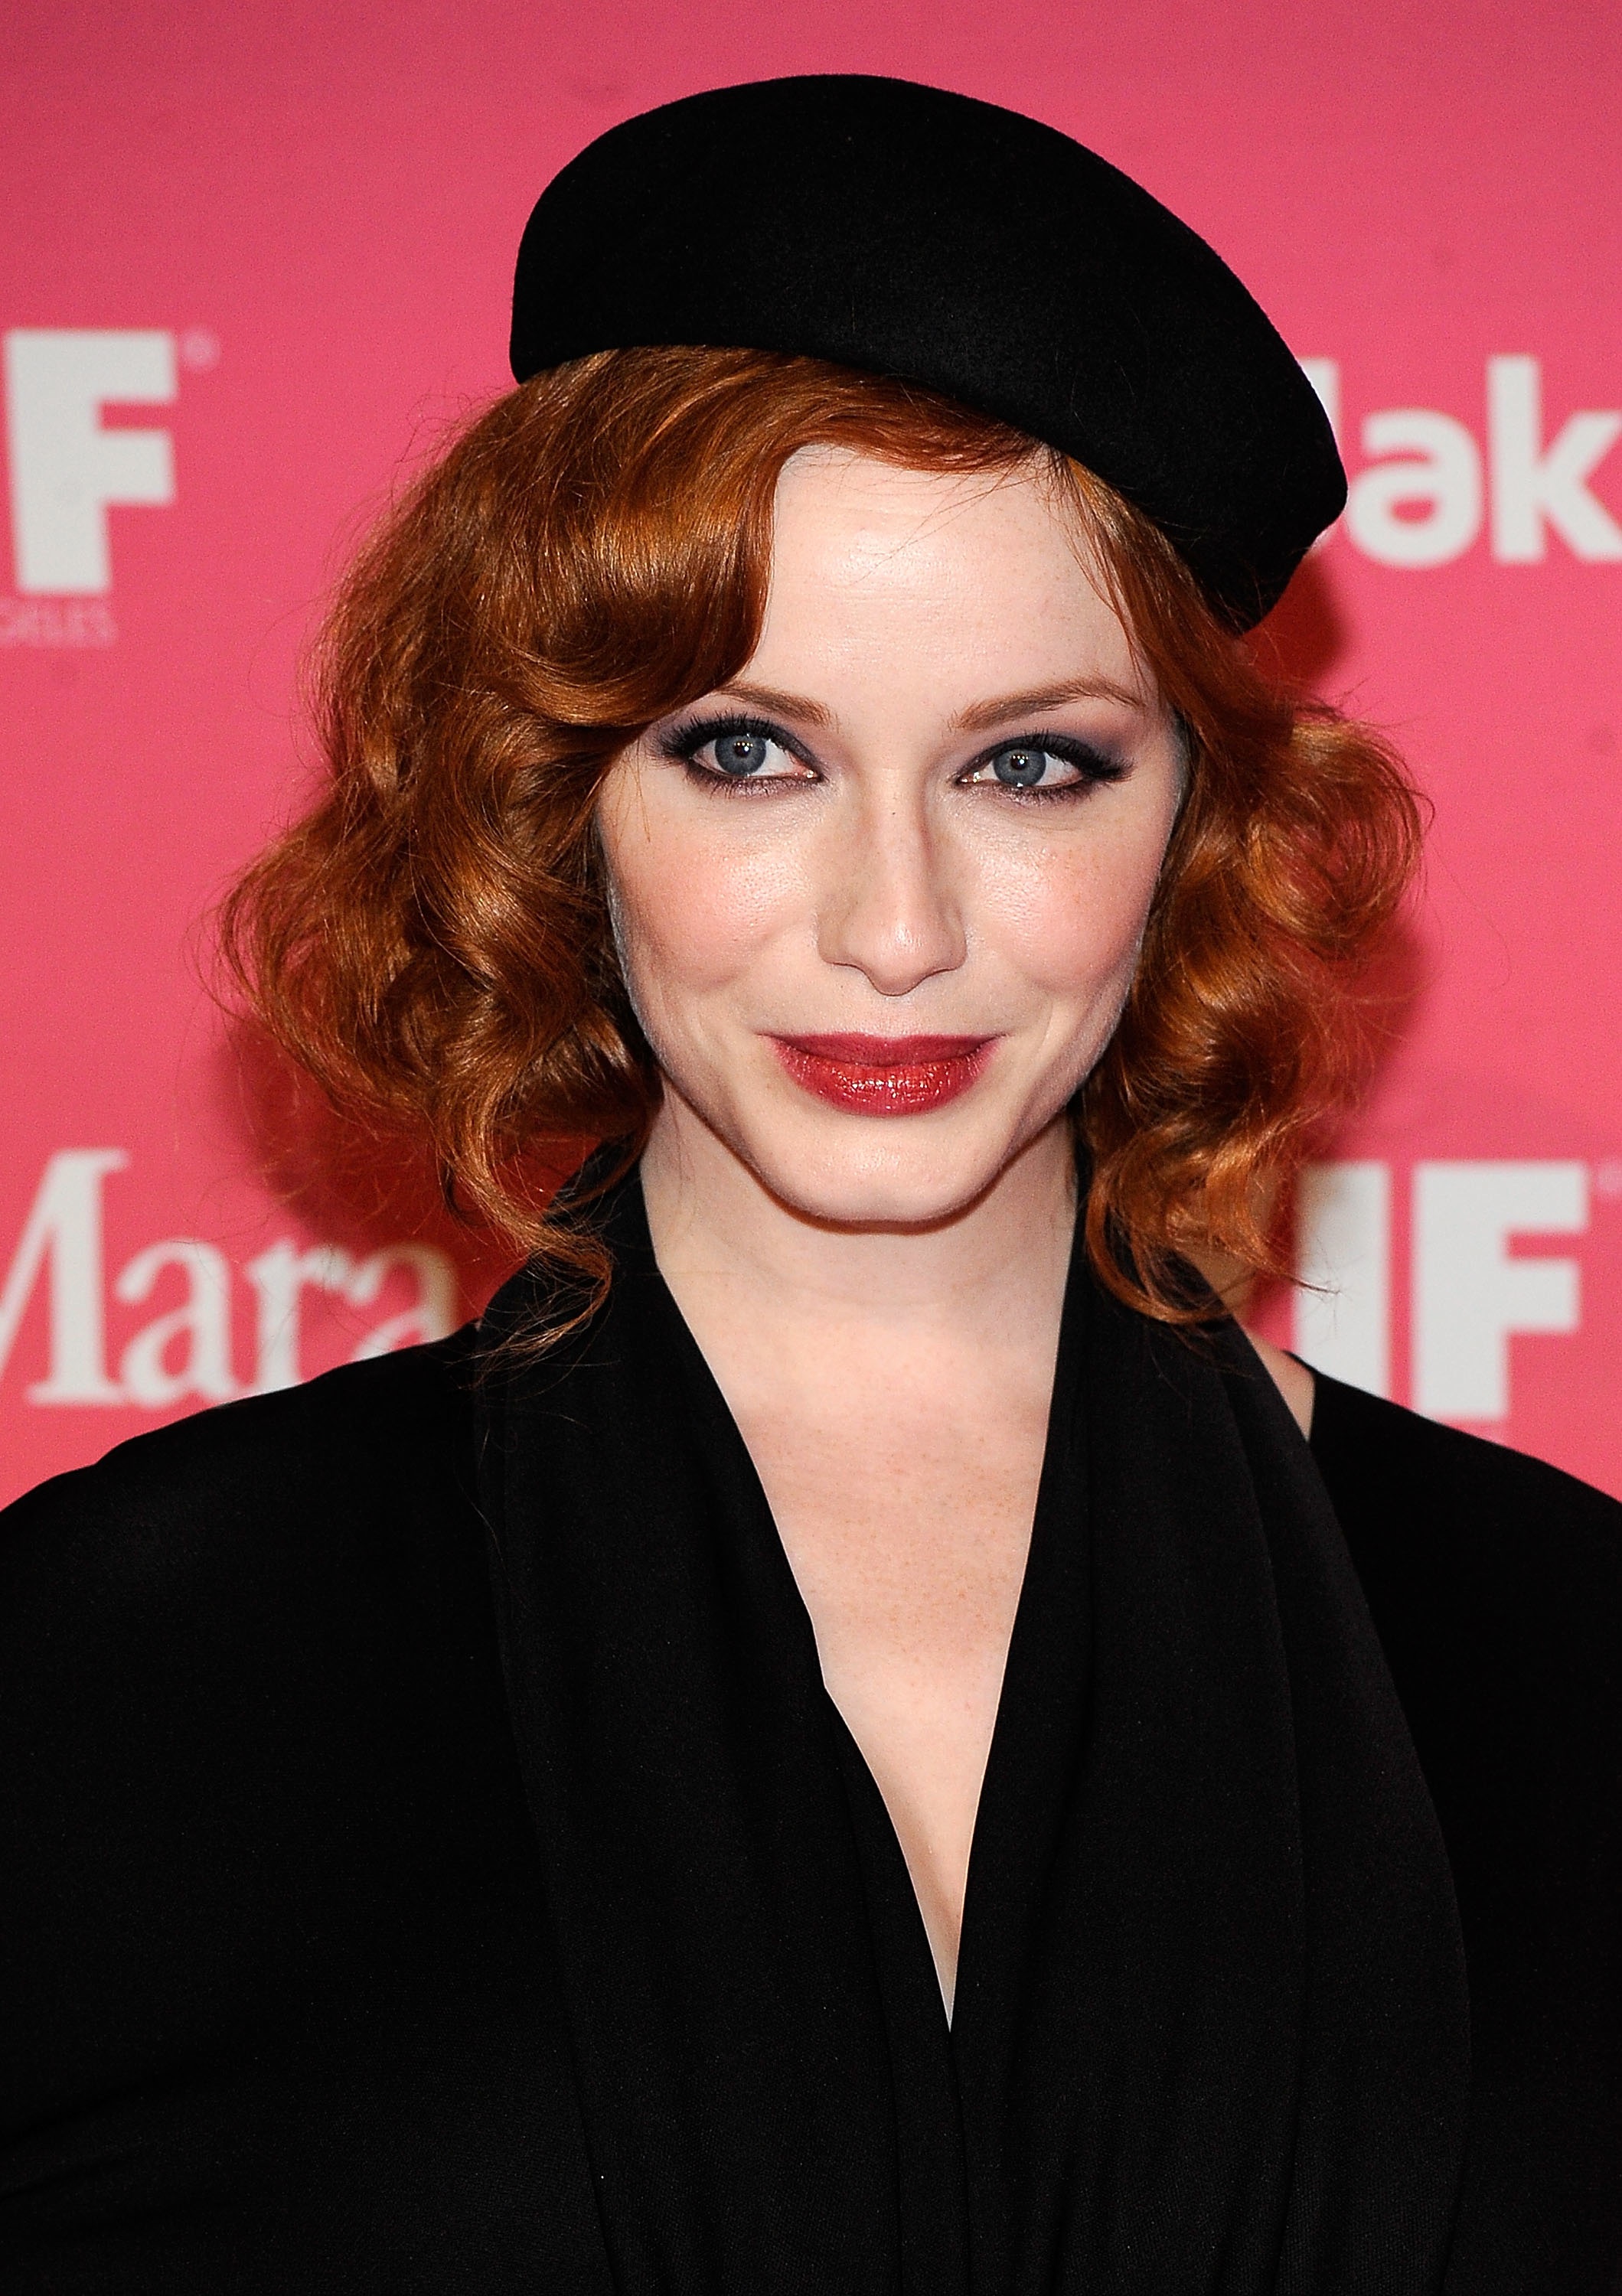 Christina Hendricks On The Controversy Over Her Physique And Why It